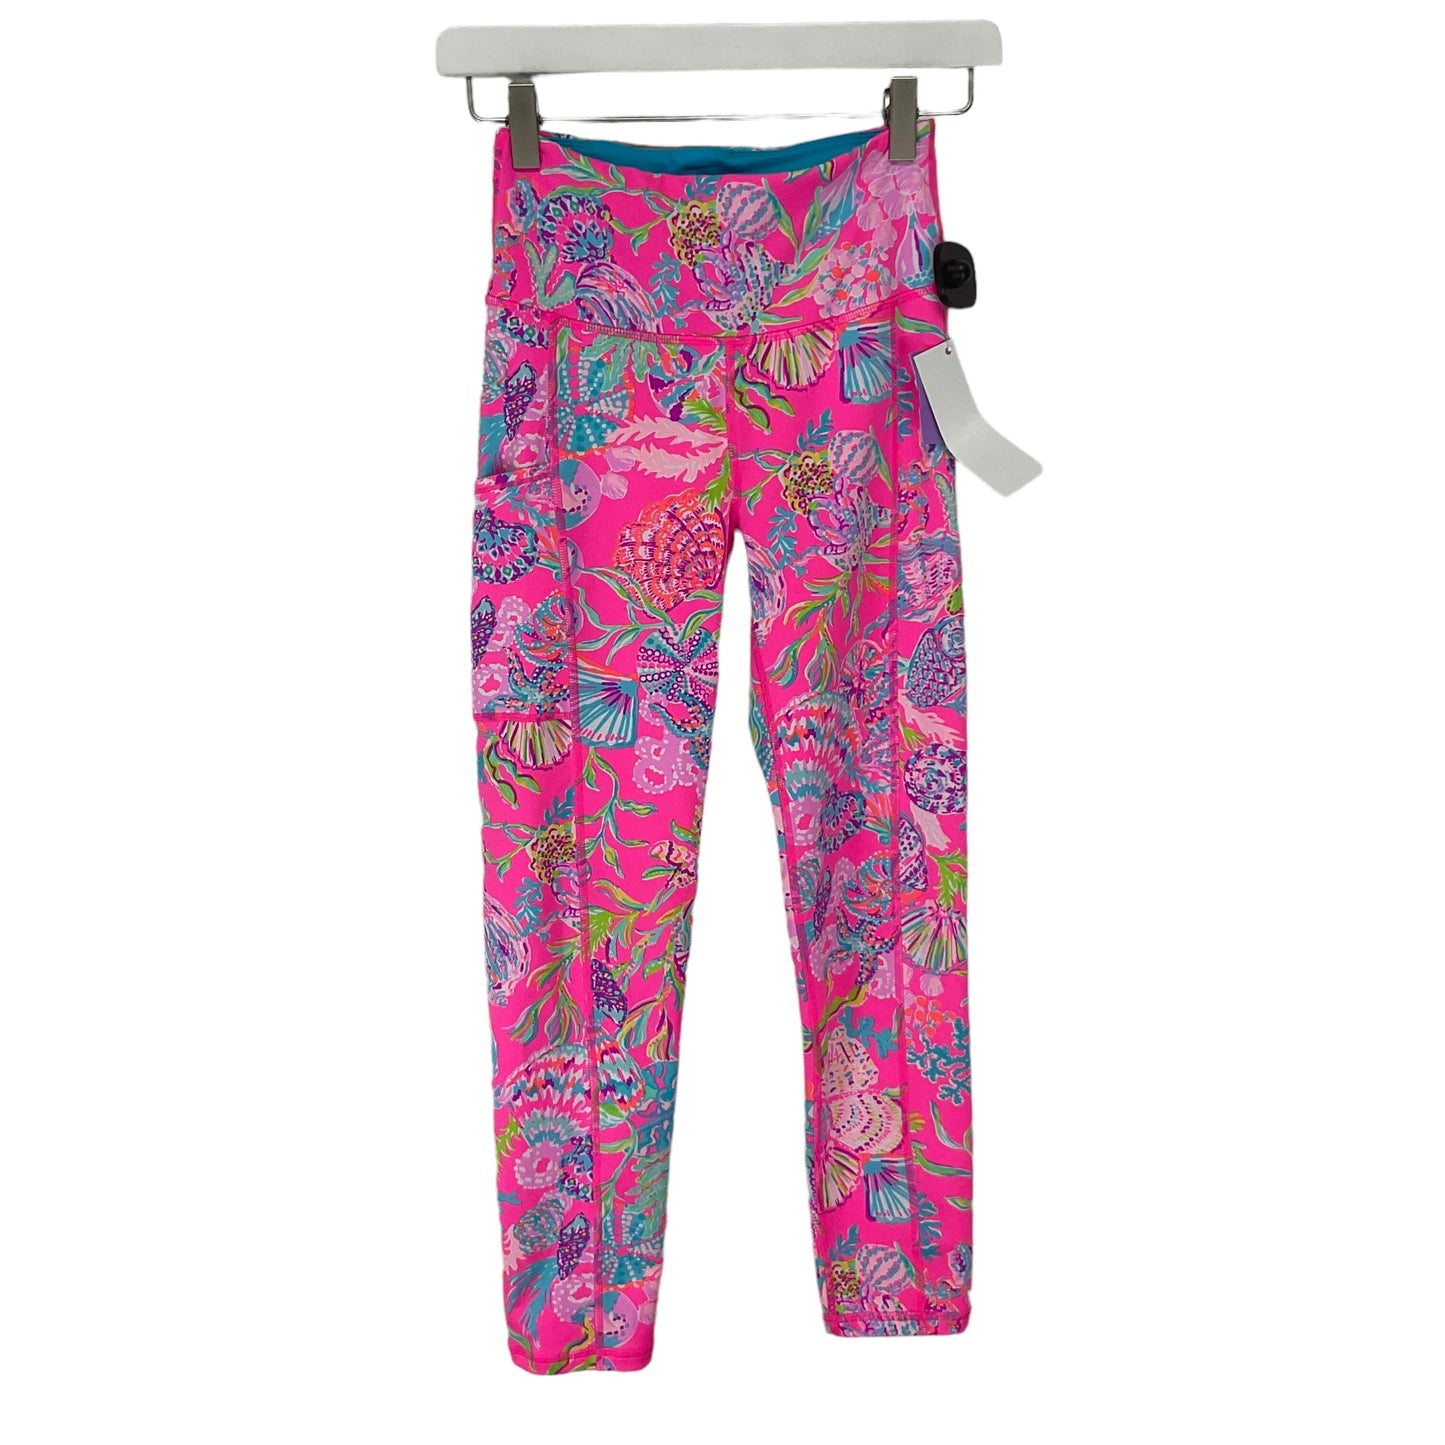 Pink Pants Designer Lilly Pulitzer, Size Xs